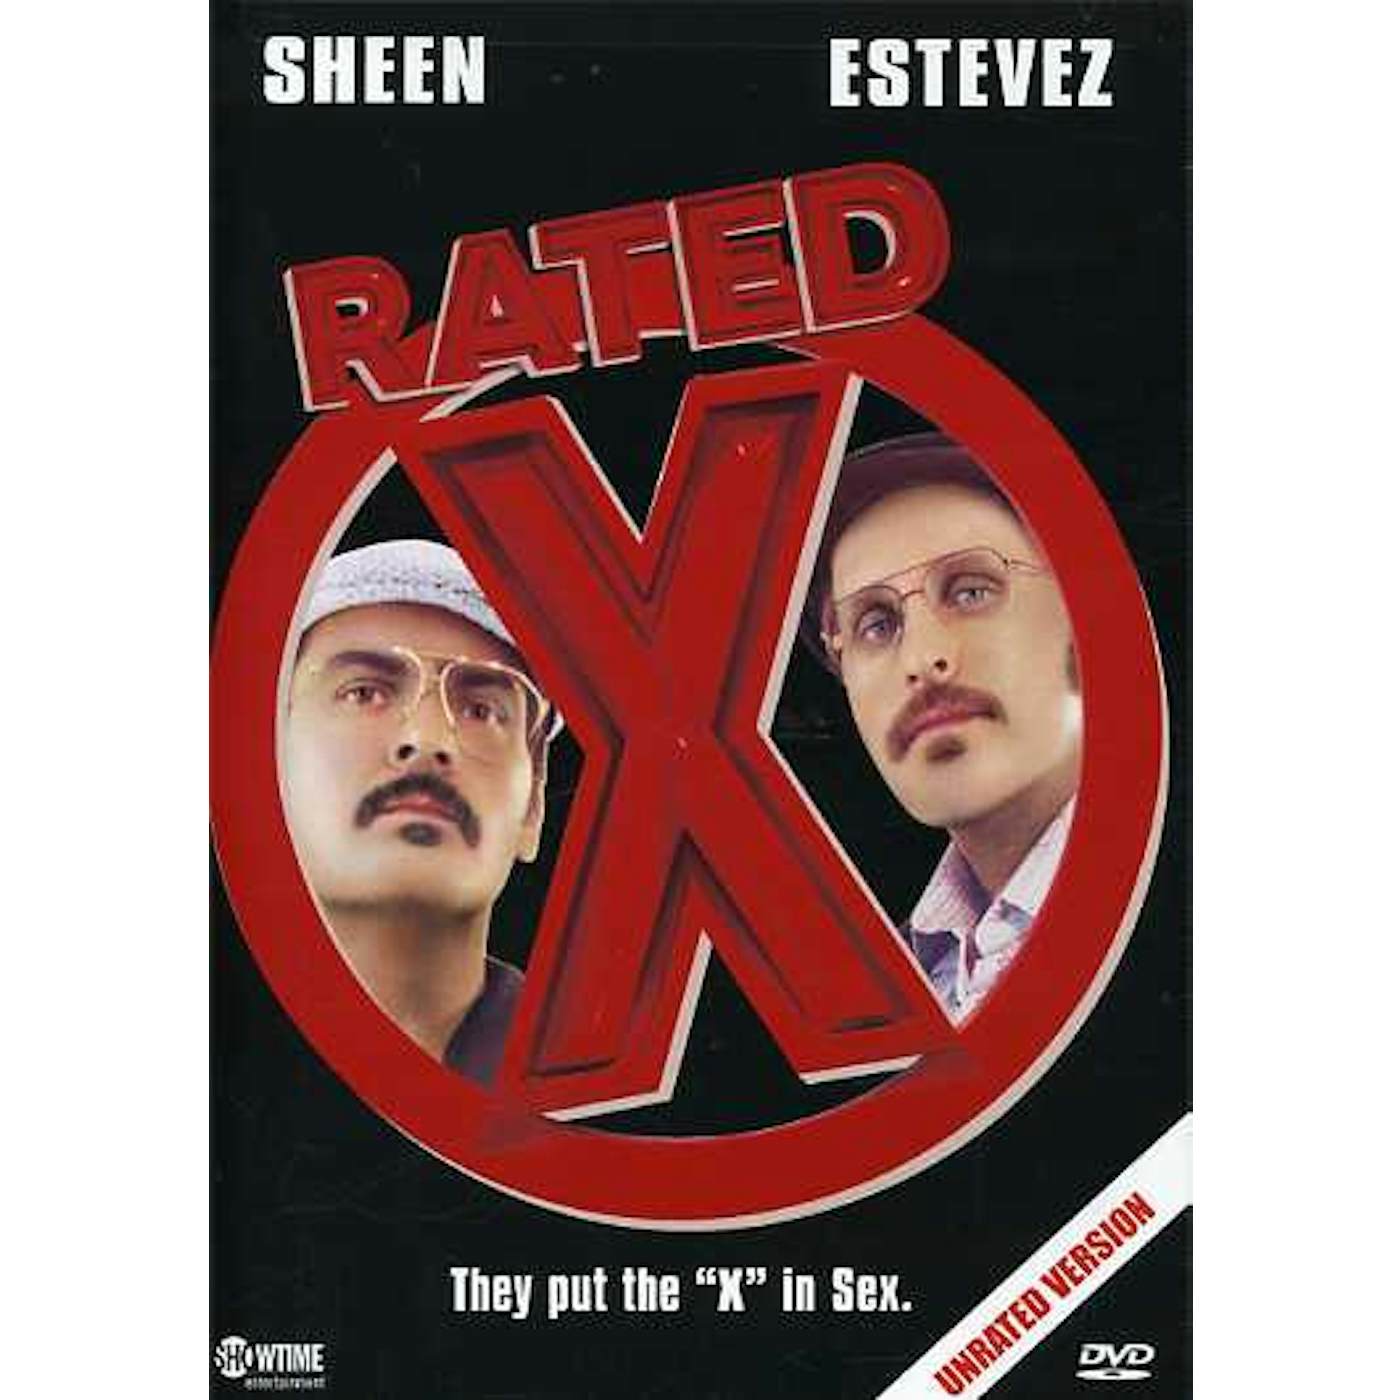 RATED X DVD